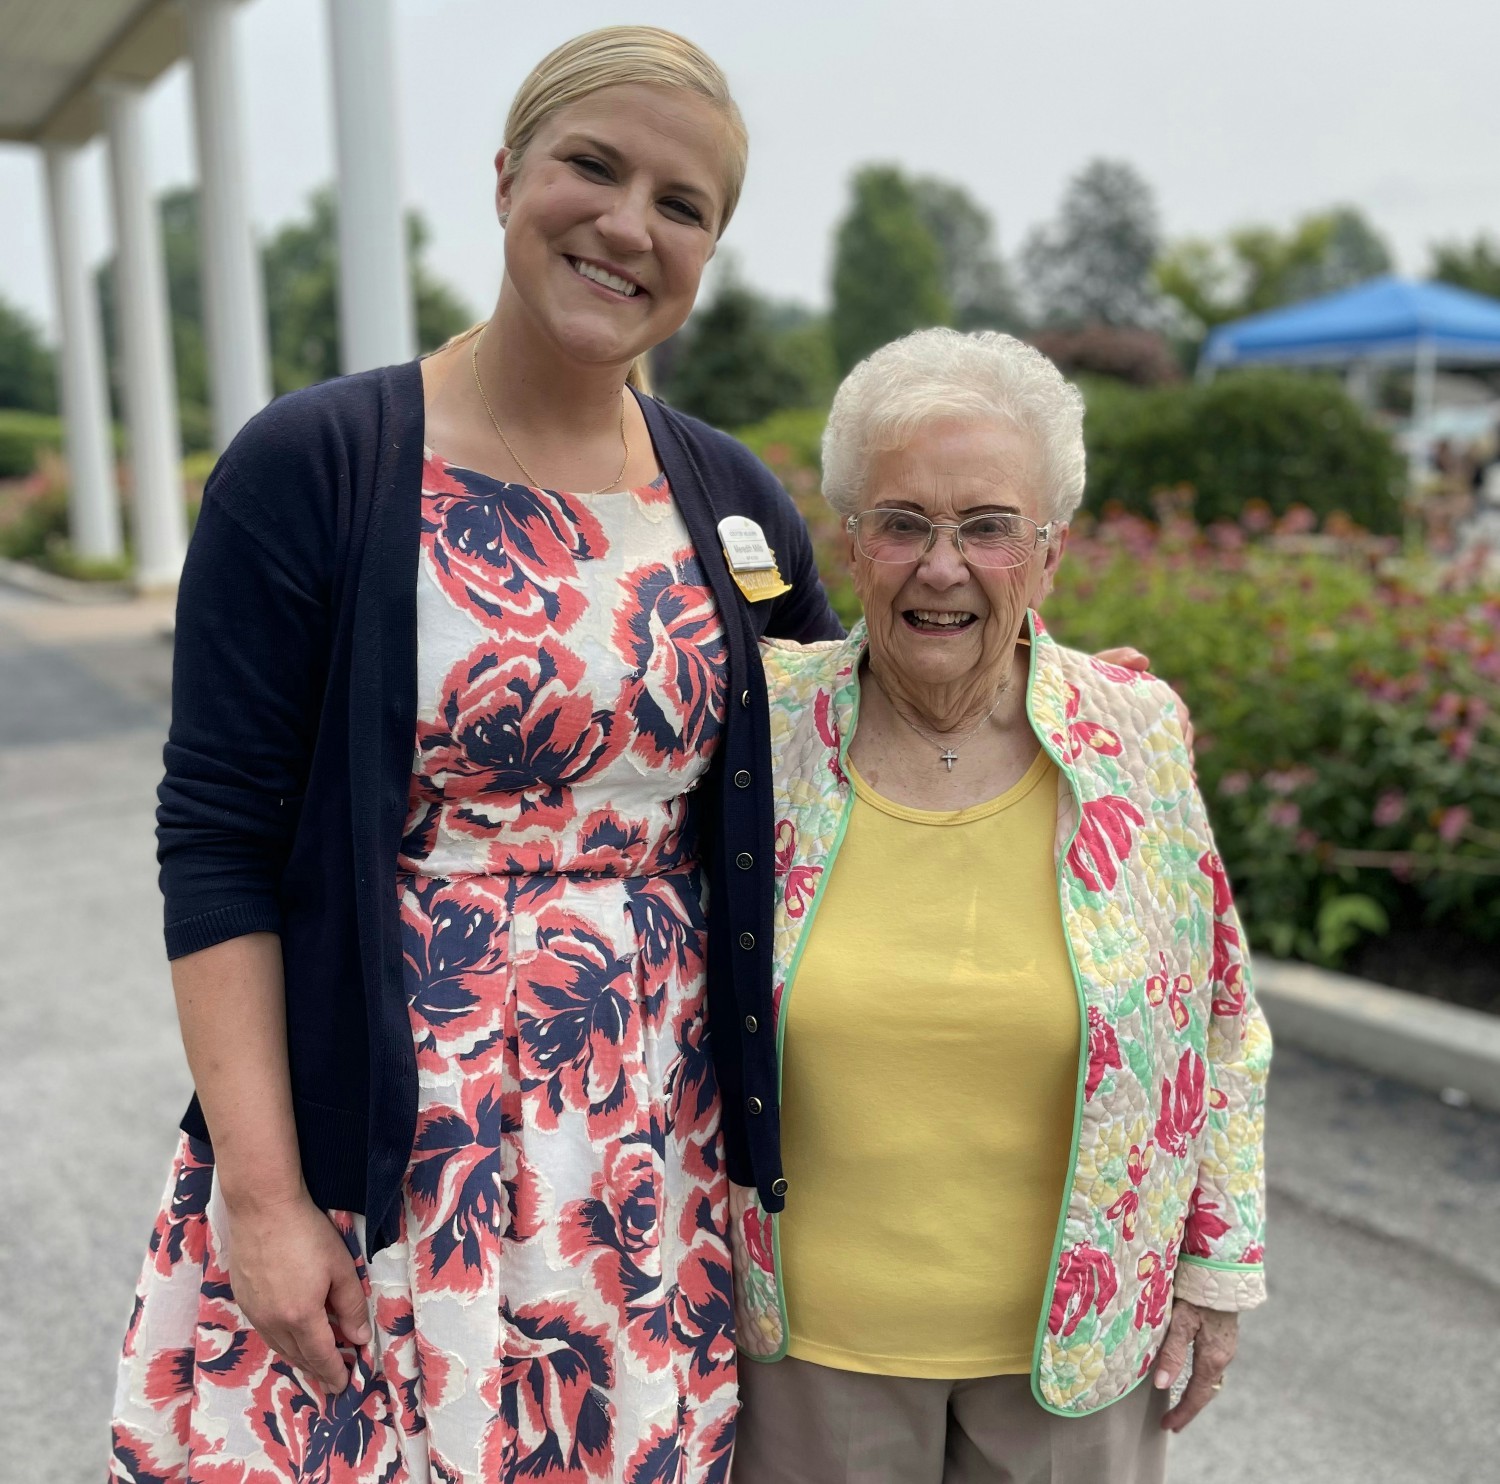 Meredith Mills, President and CEO with one of our residents.